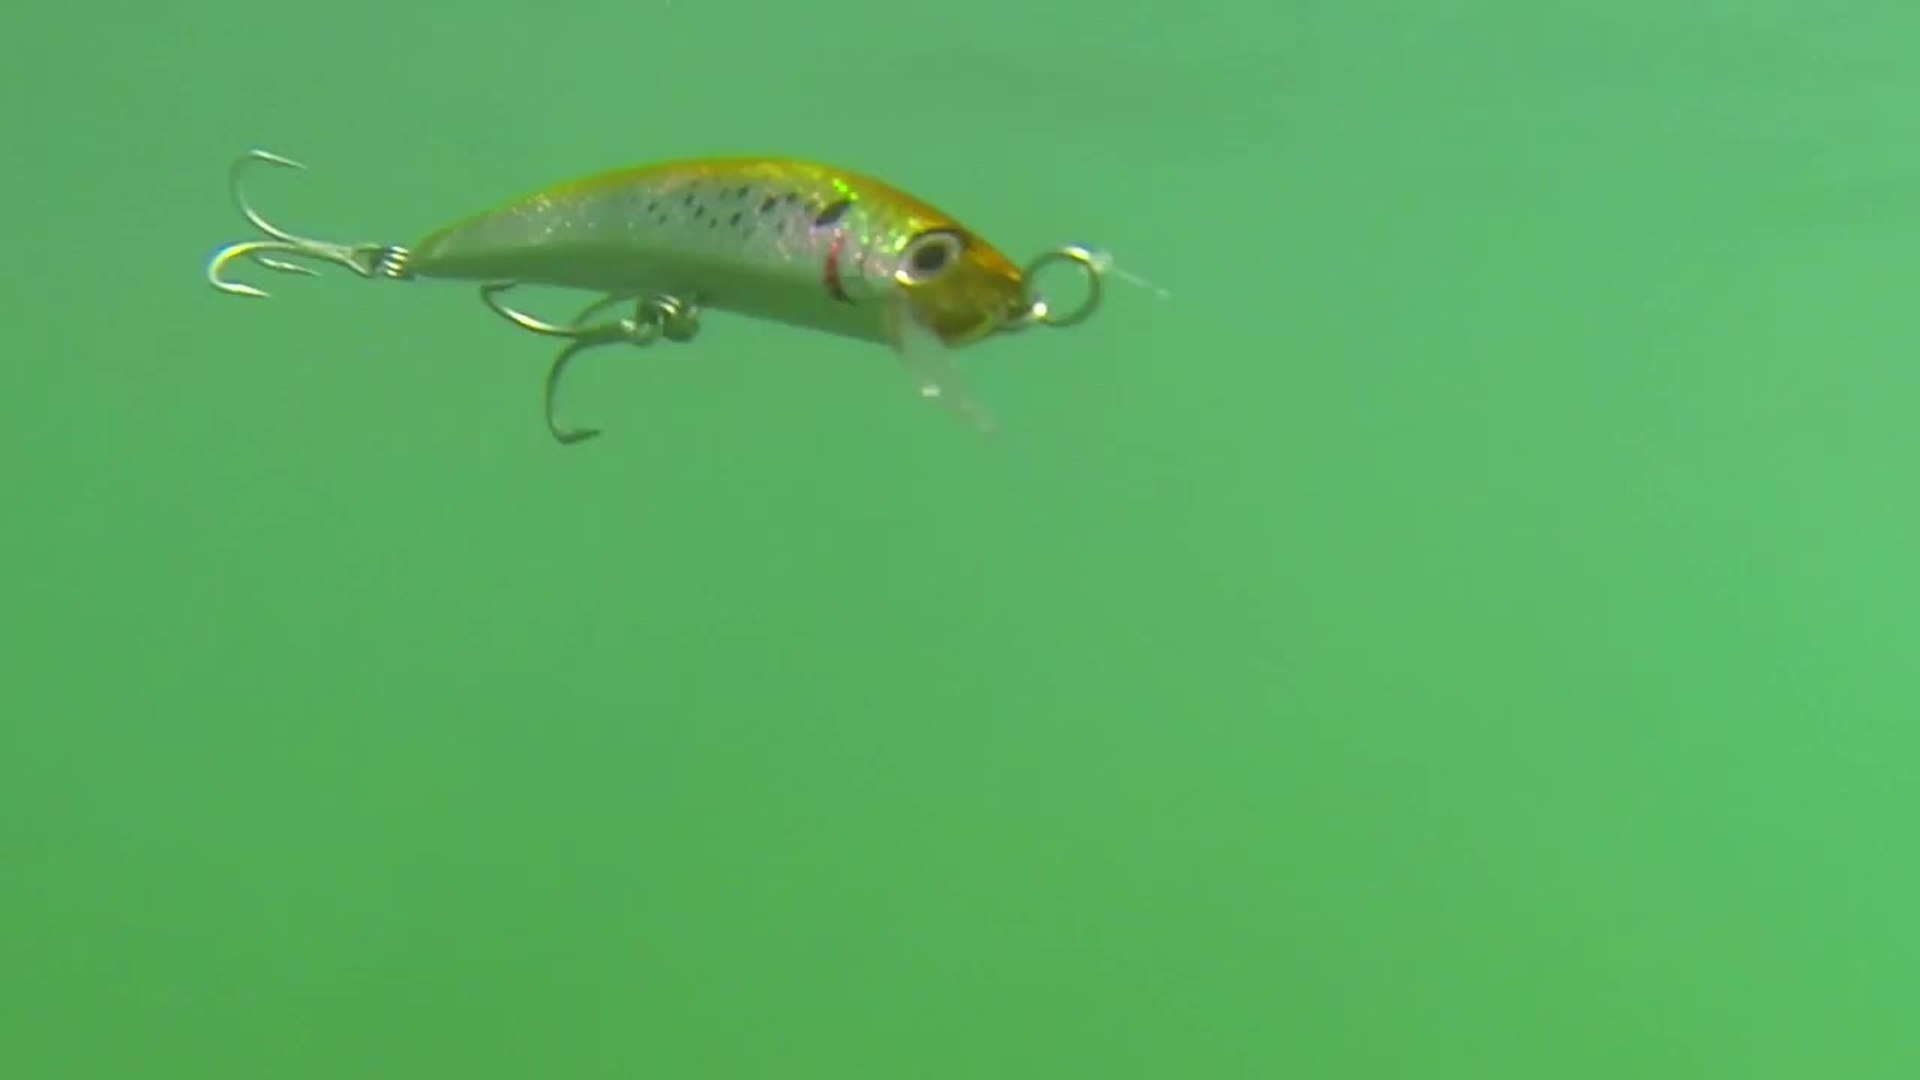 Yo-Zuri Lures - Crystal Minnows - Floating Lures - video Dailymotion